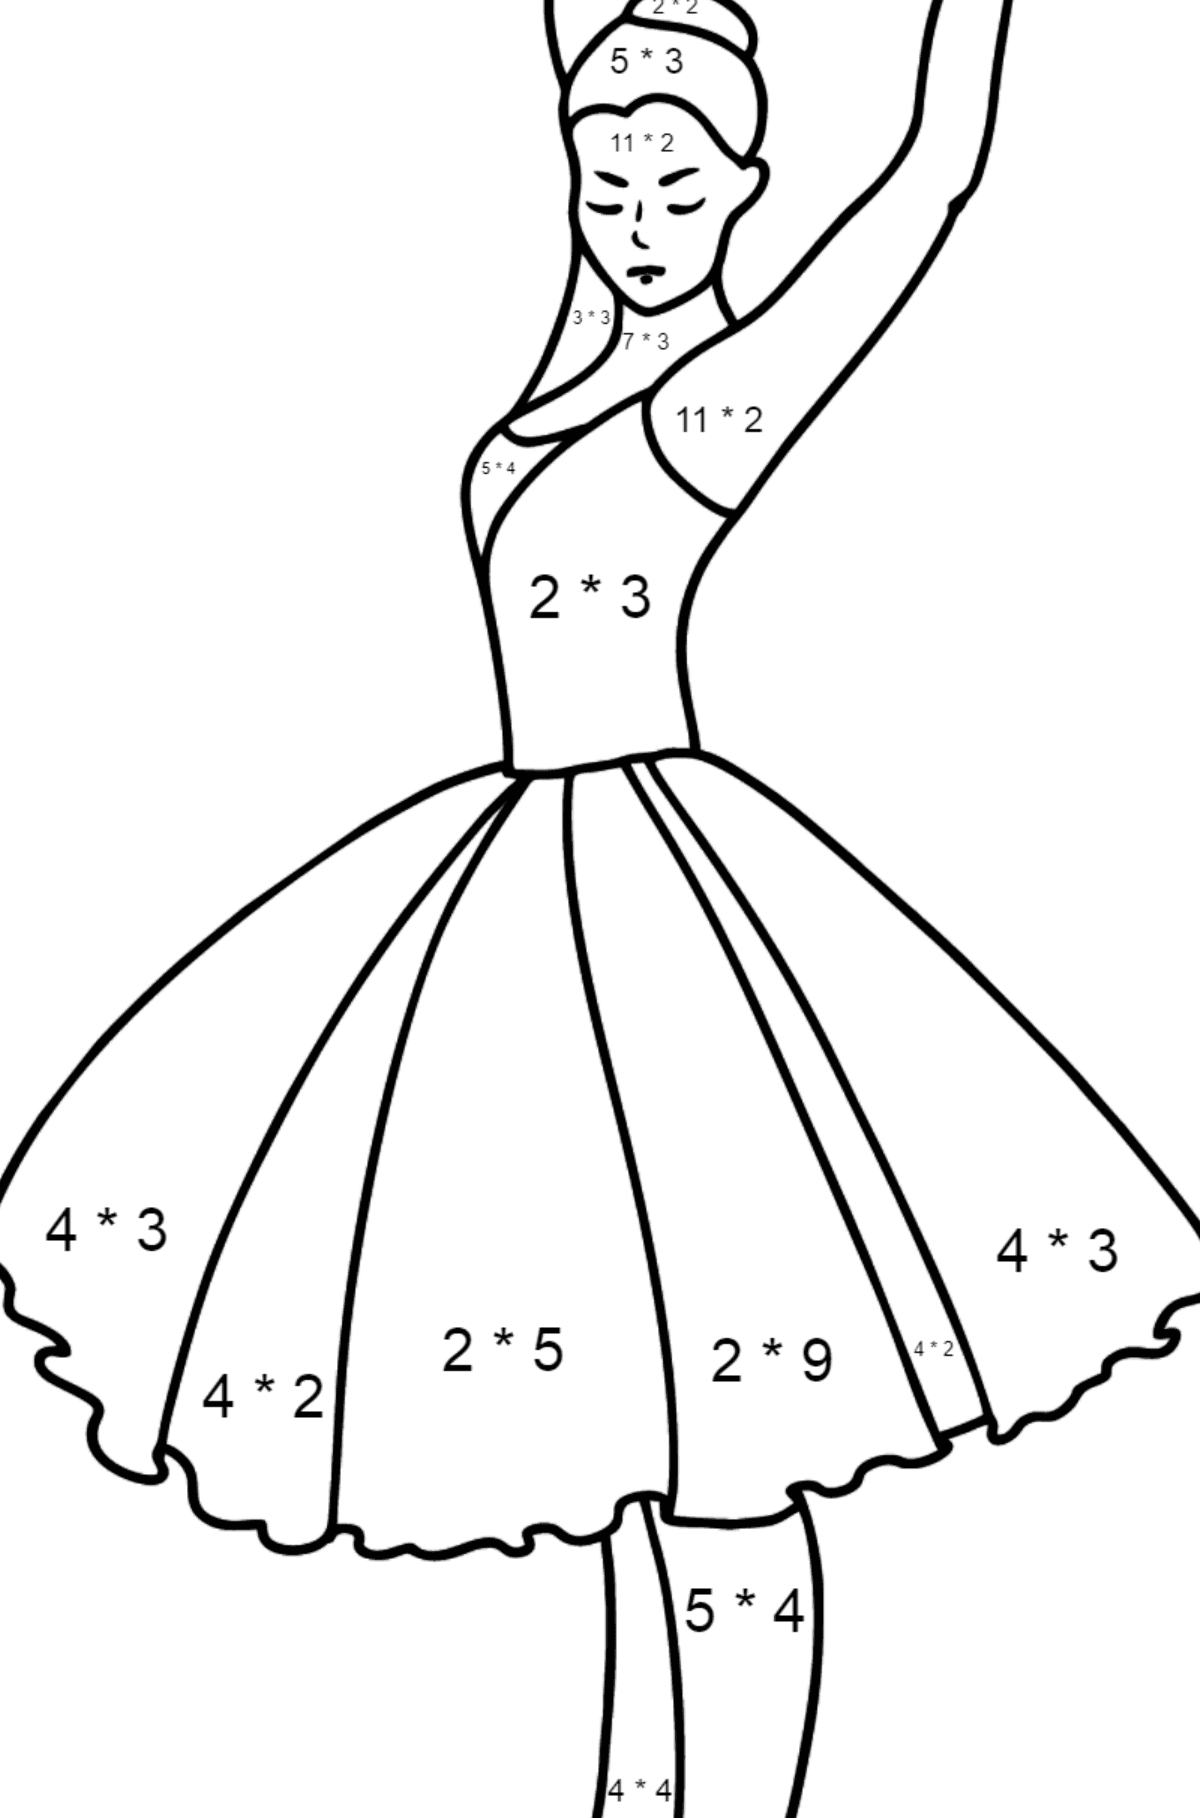 Ballerina Dancing coloring page - Math Coloring - Multiplication for Kids